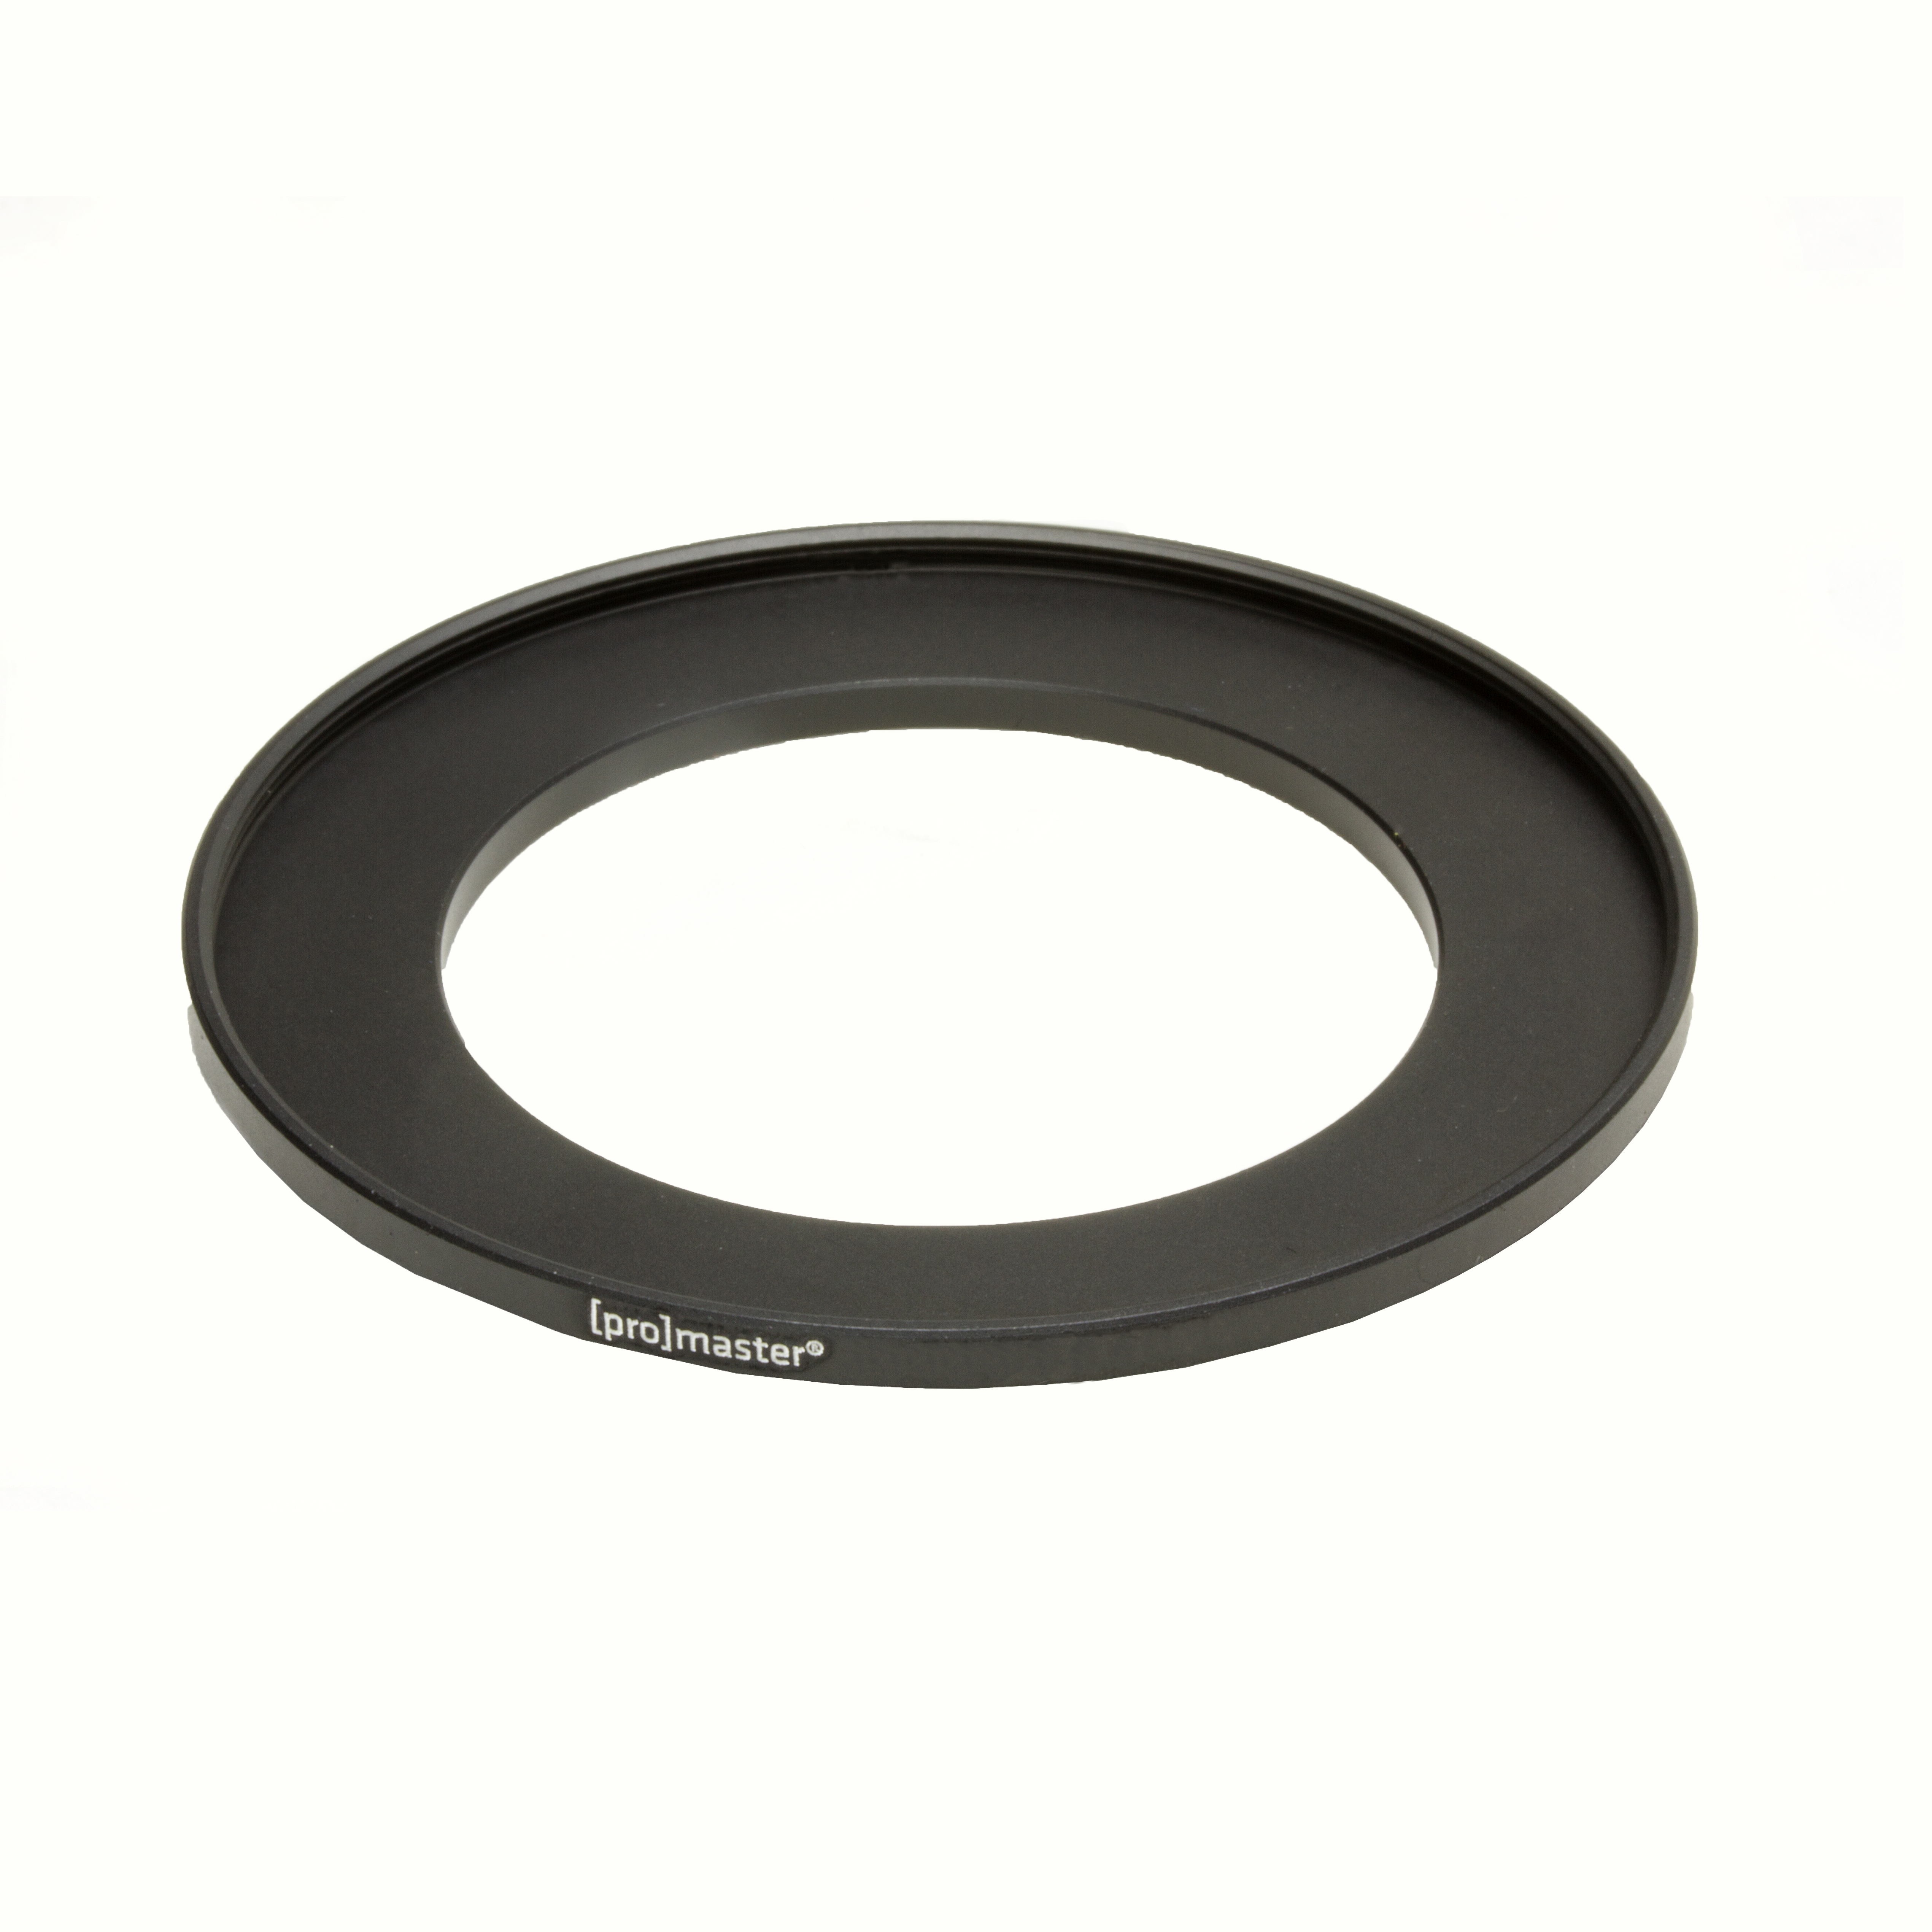 Promaster 4907 37-46mm Step-Up Ring